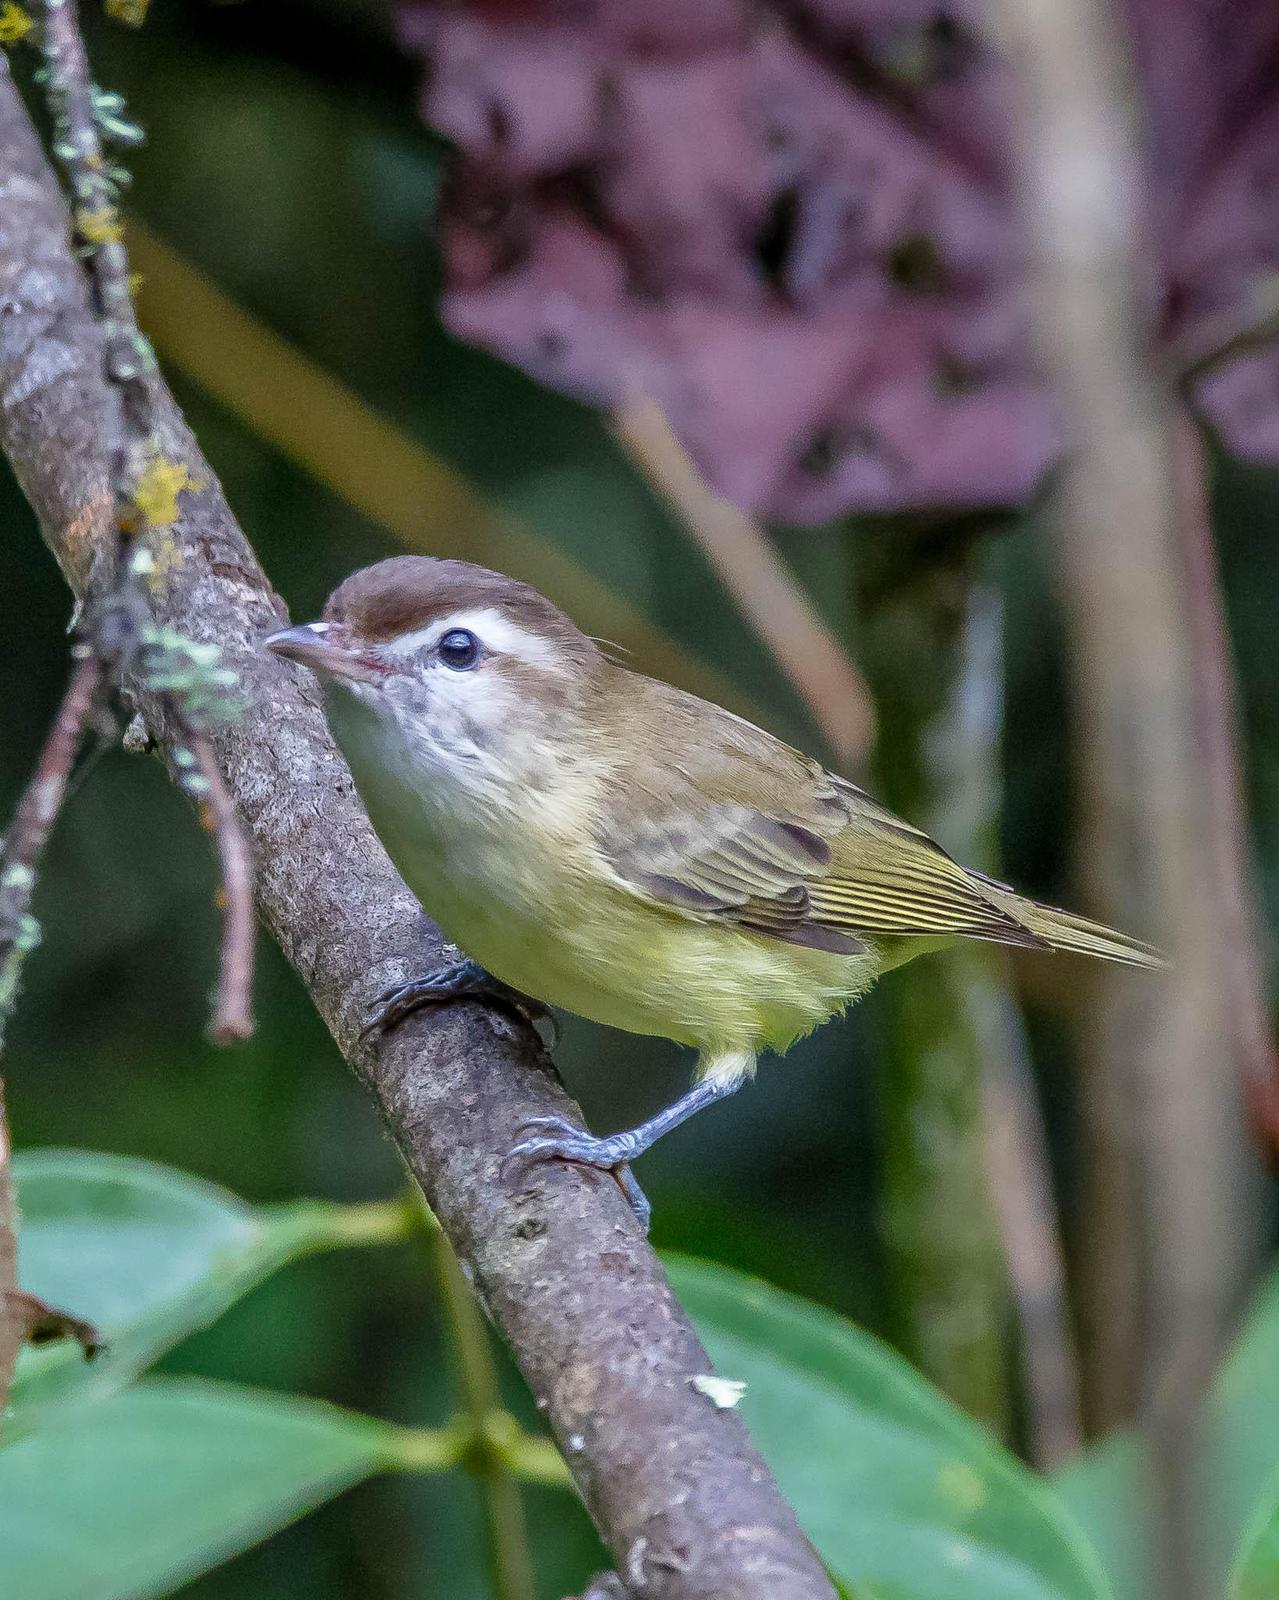 Brown-capped Vireo Photo by Denis Rivard